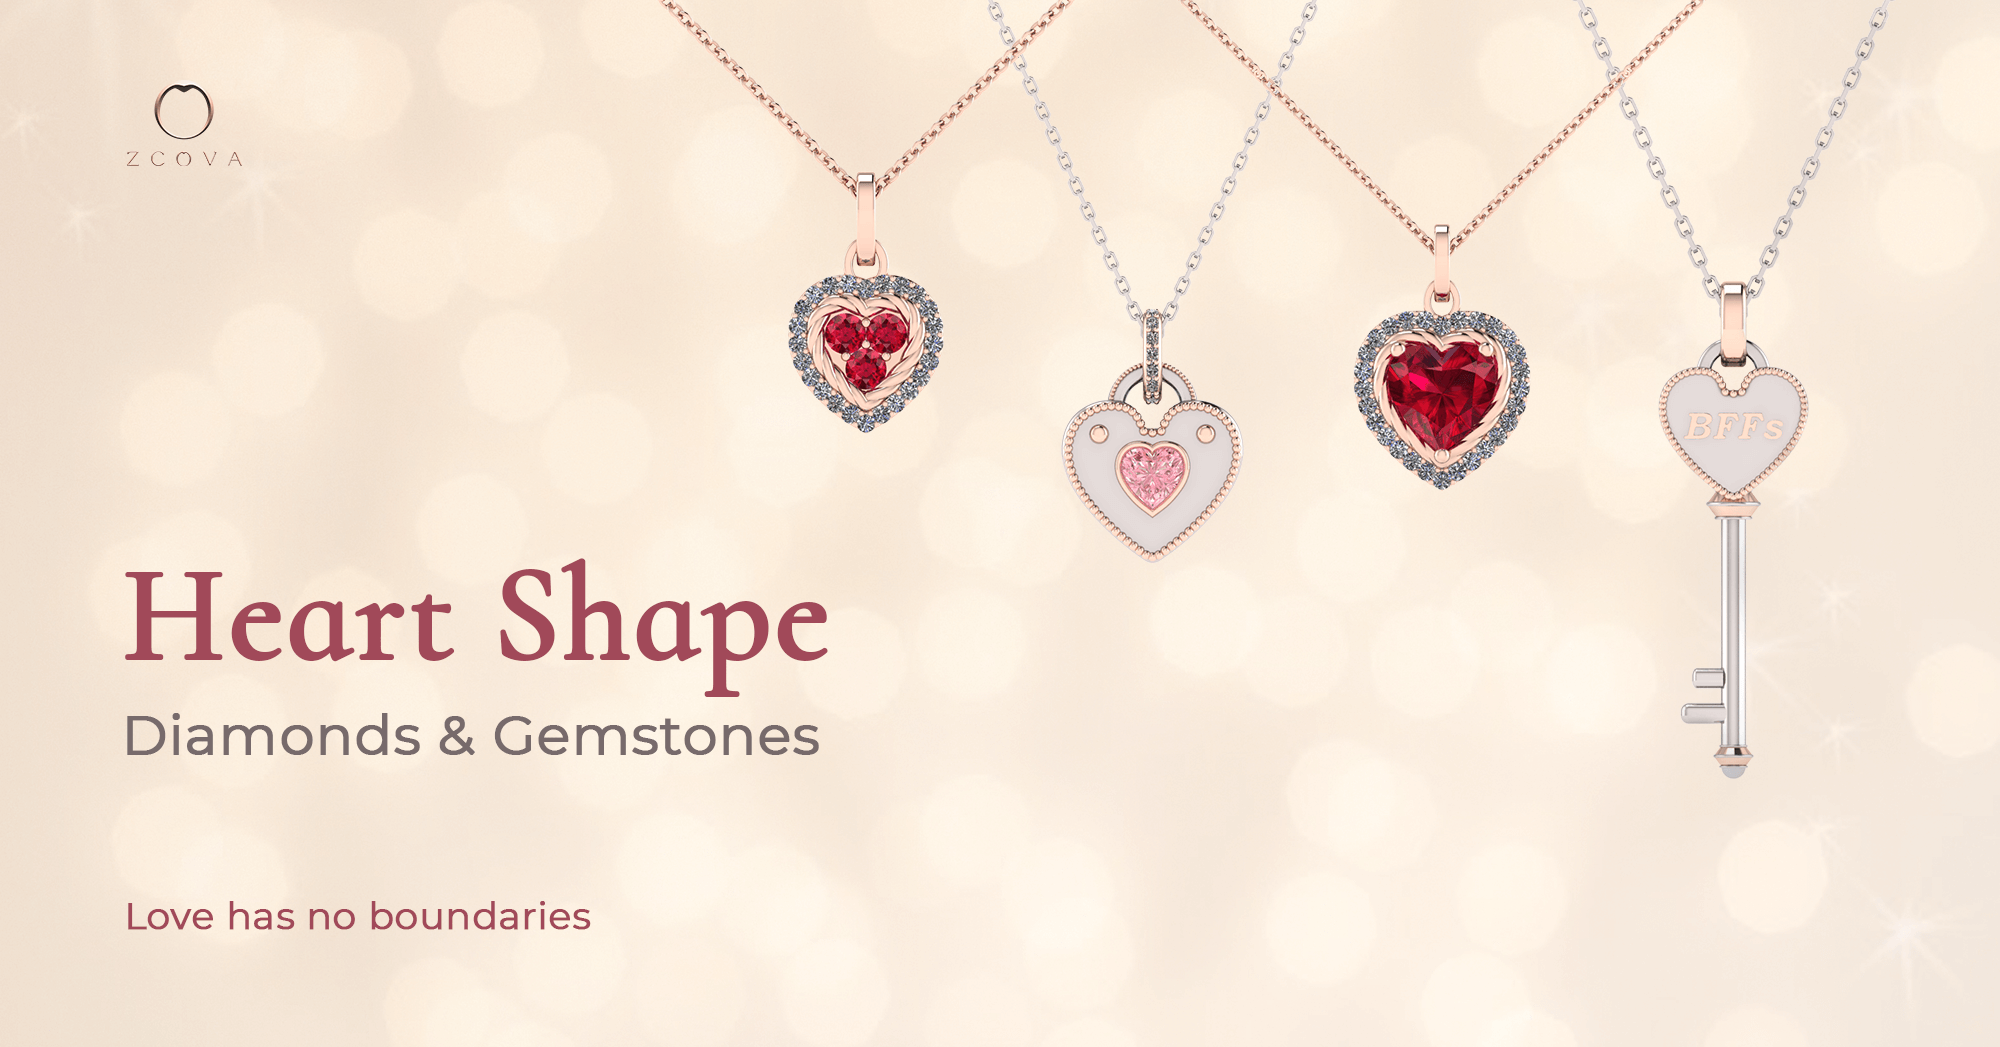 Heart shape diamond and gemstone jewellery; valentines day gift; galentines day gift